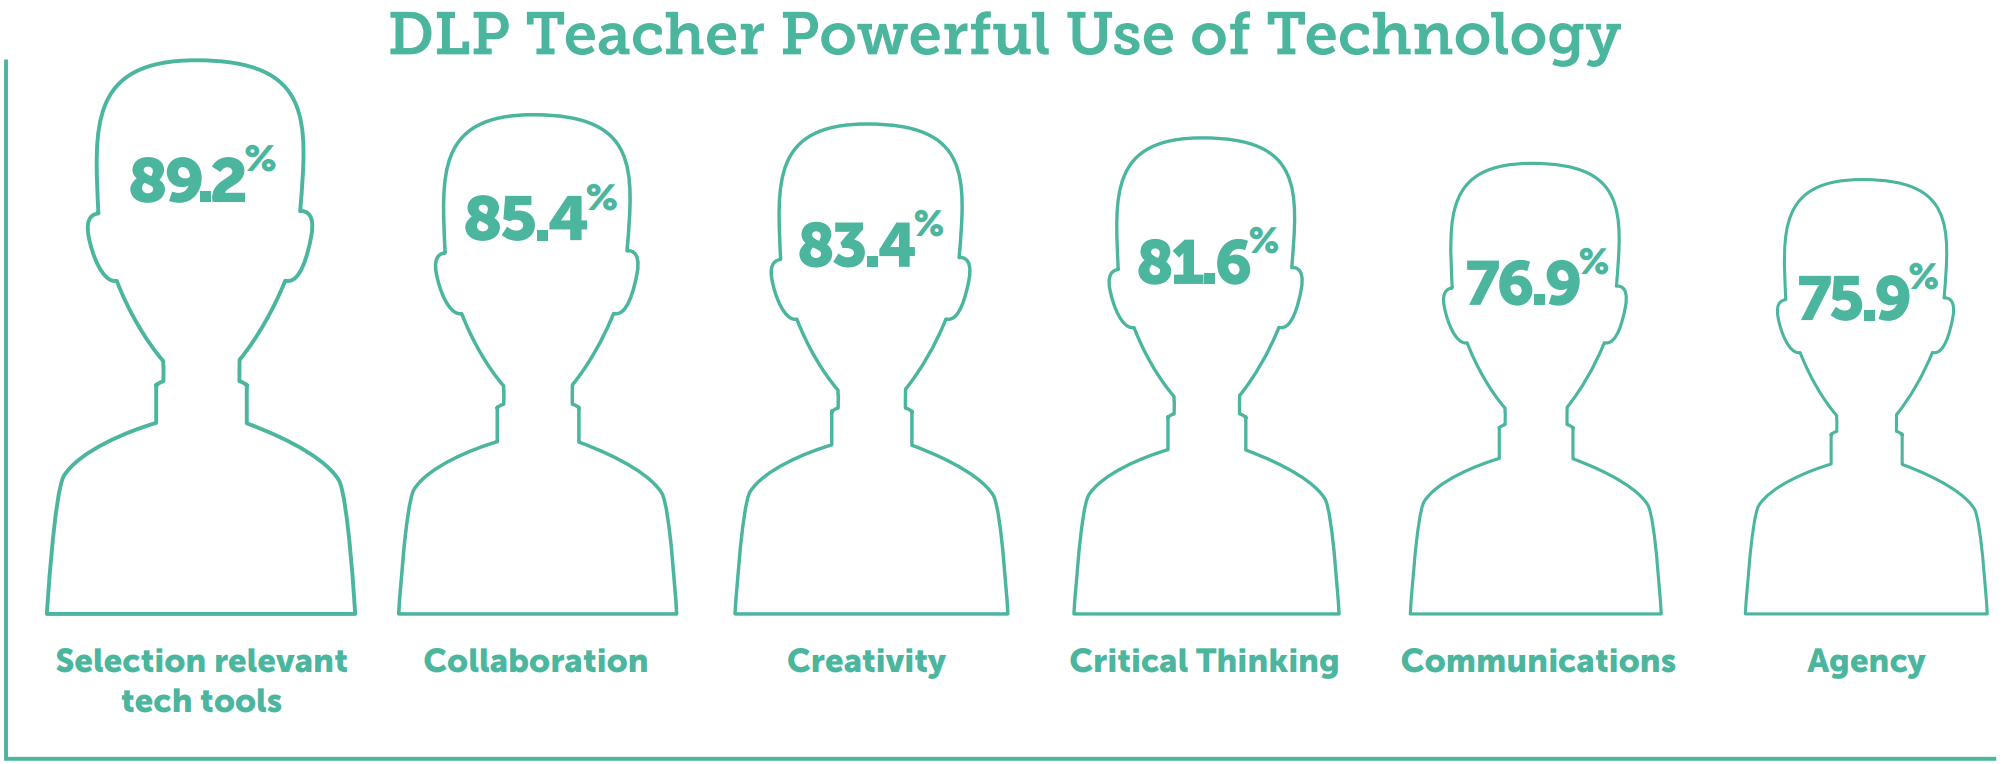 Chart: DLP Teacher Powerful Use of Technology. 89.2% Selection relevant tech tools; 85.4% Collaboration; 83.4% Creativity; 81.6% Critical Thinking; 76.9% Communications; 75.9% Agency